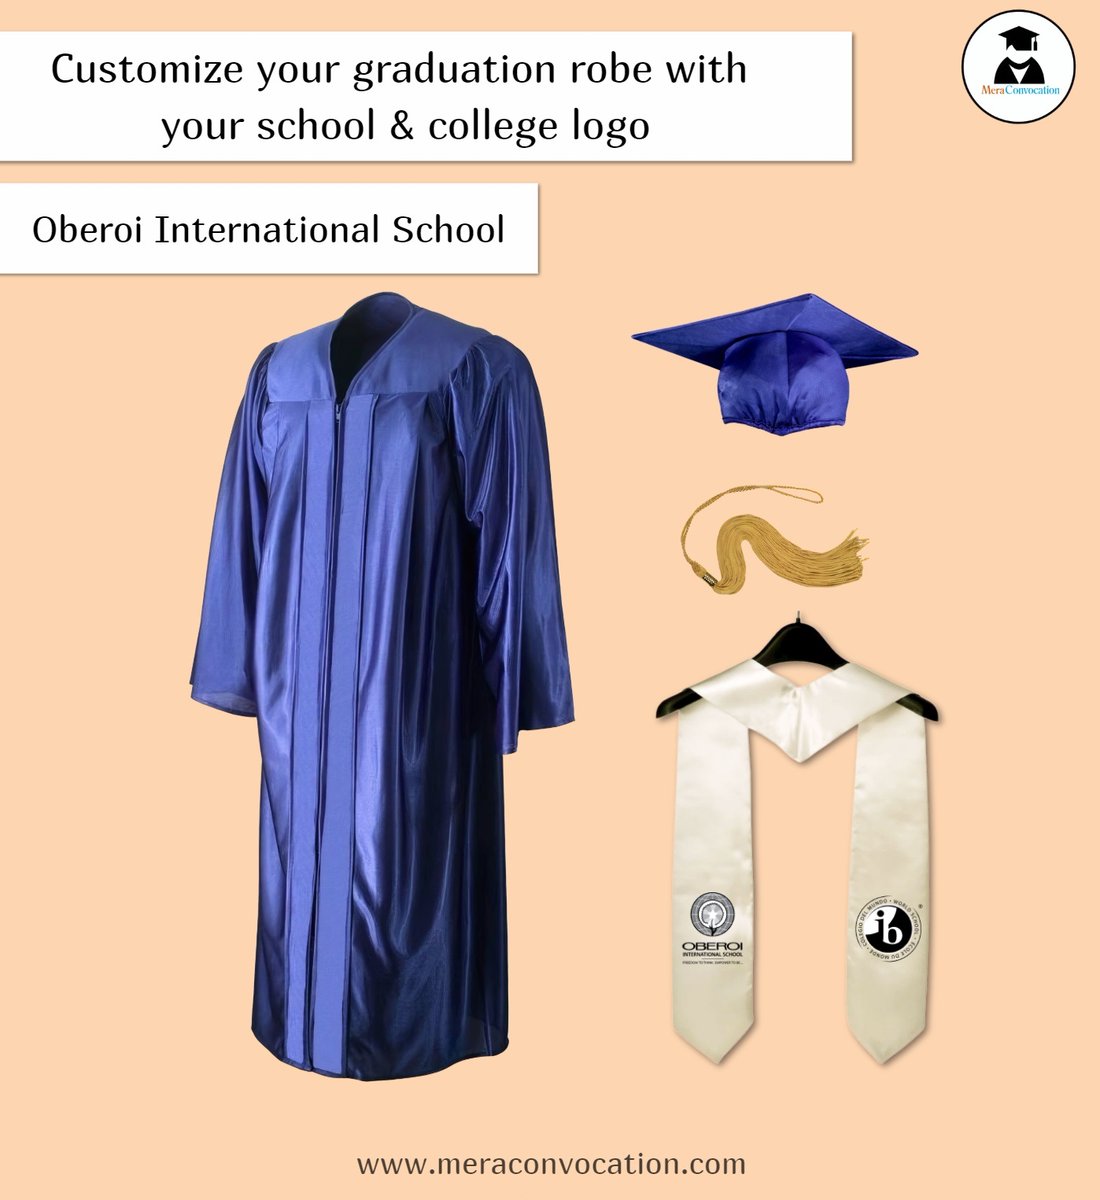 MeraConvocation Yellow Shiny Convocation Gown and Cap Graduation Gown Price  in India - Buy MeraConvocation Yellow Shiny Convocation Gown and Cap Graduation  Gown online at Flipkart.com